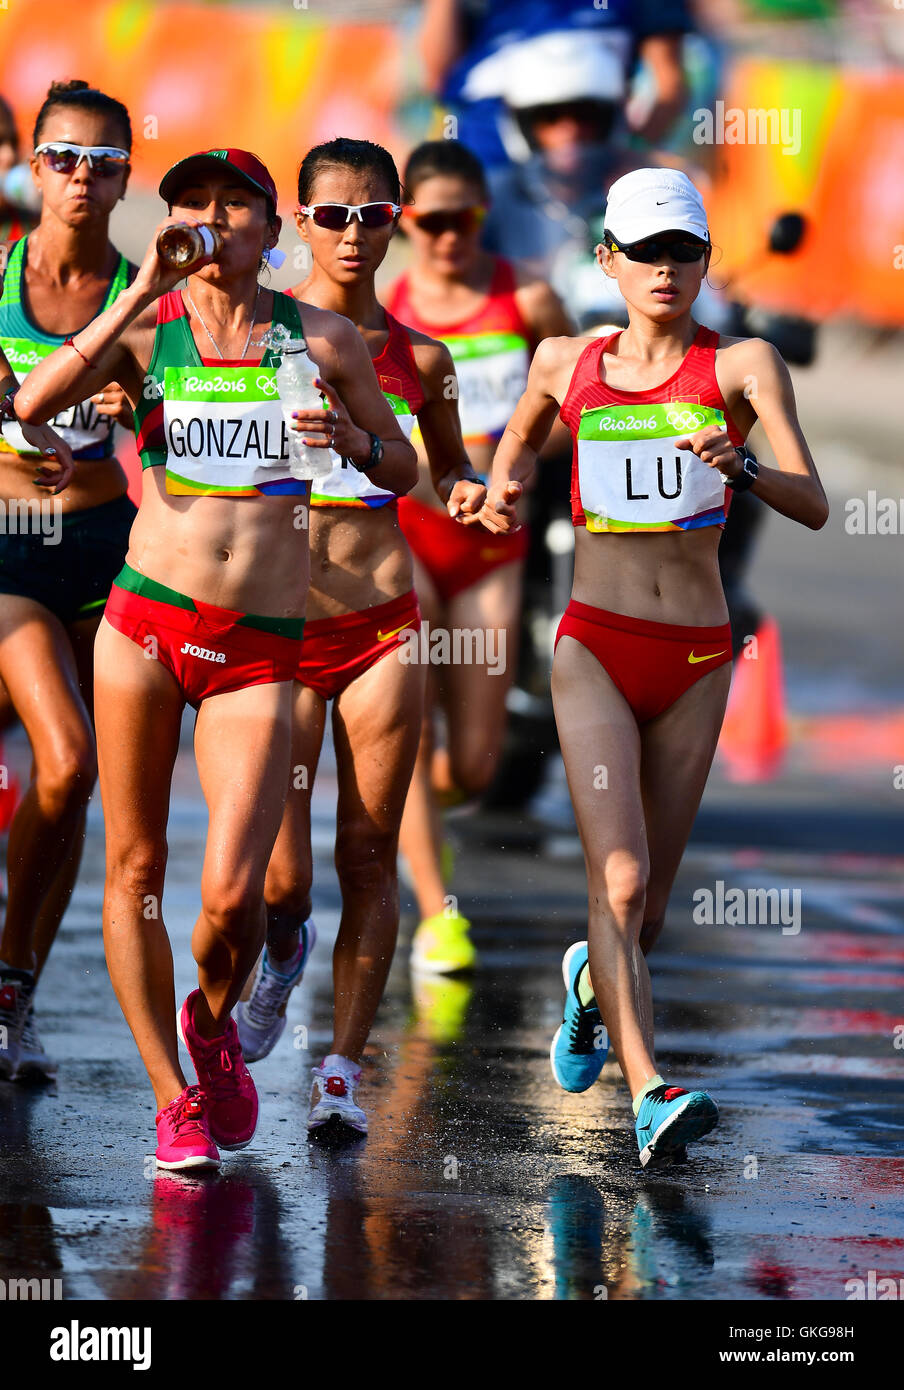 Rio de Janeiro, Brazil. 19th August, 2016. Maria Gonzalez of Mexico and Xiuzhi LU of China during the women's 20km race walk on Day 14 of the 2016 Rio Olympics at Pontal on August 19, 2016 in Rio de Janeiro, Brazil. (Photo by Roger Sedres/Gallo Images) Credit:  Roger Sedres/Alamy Live News Stock Photo